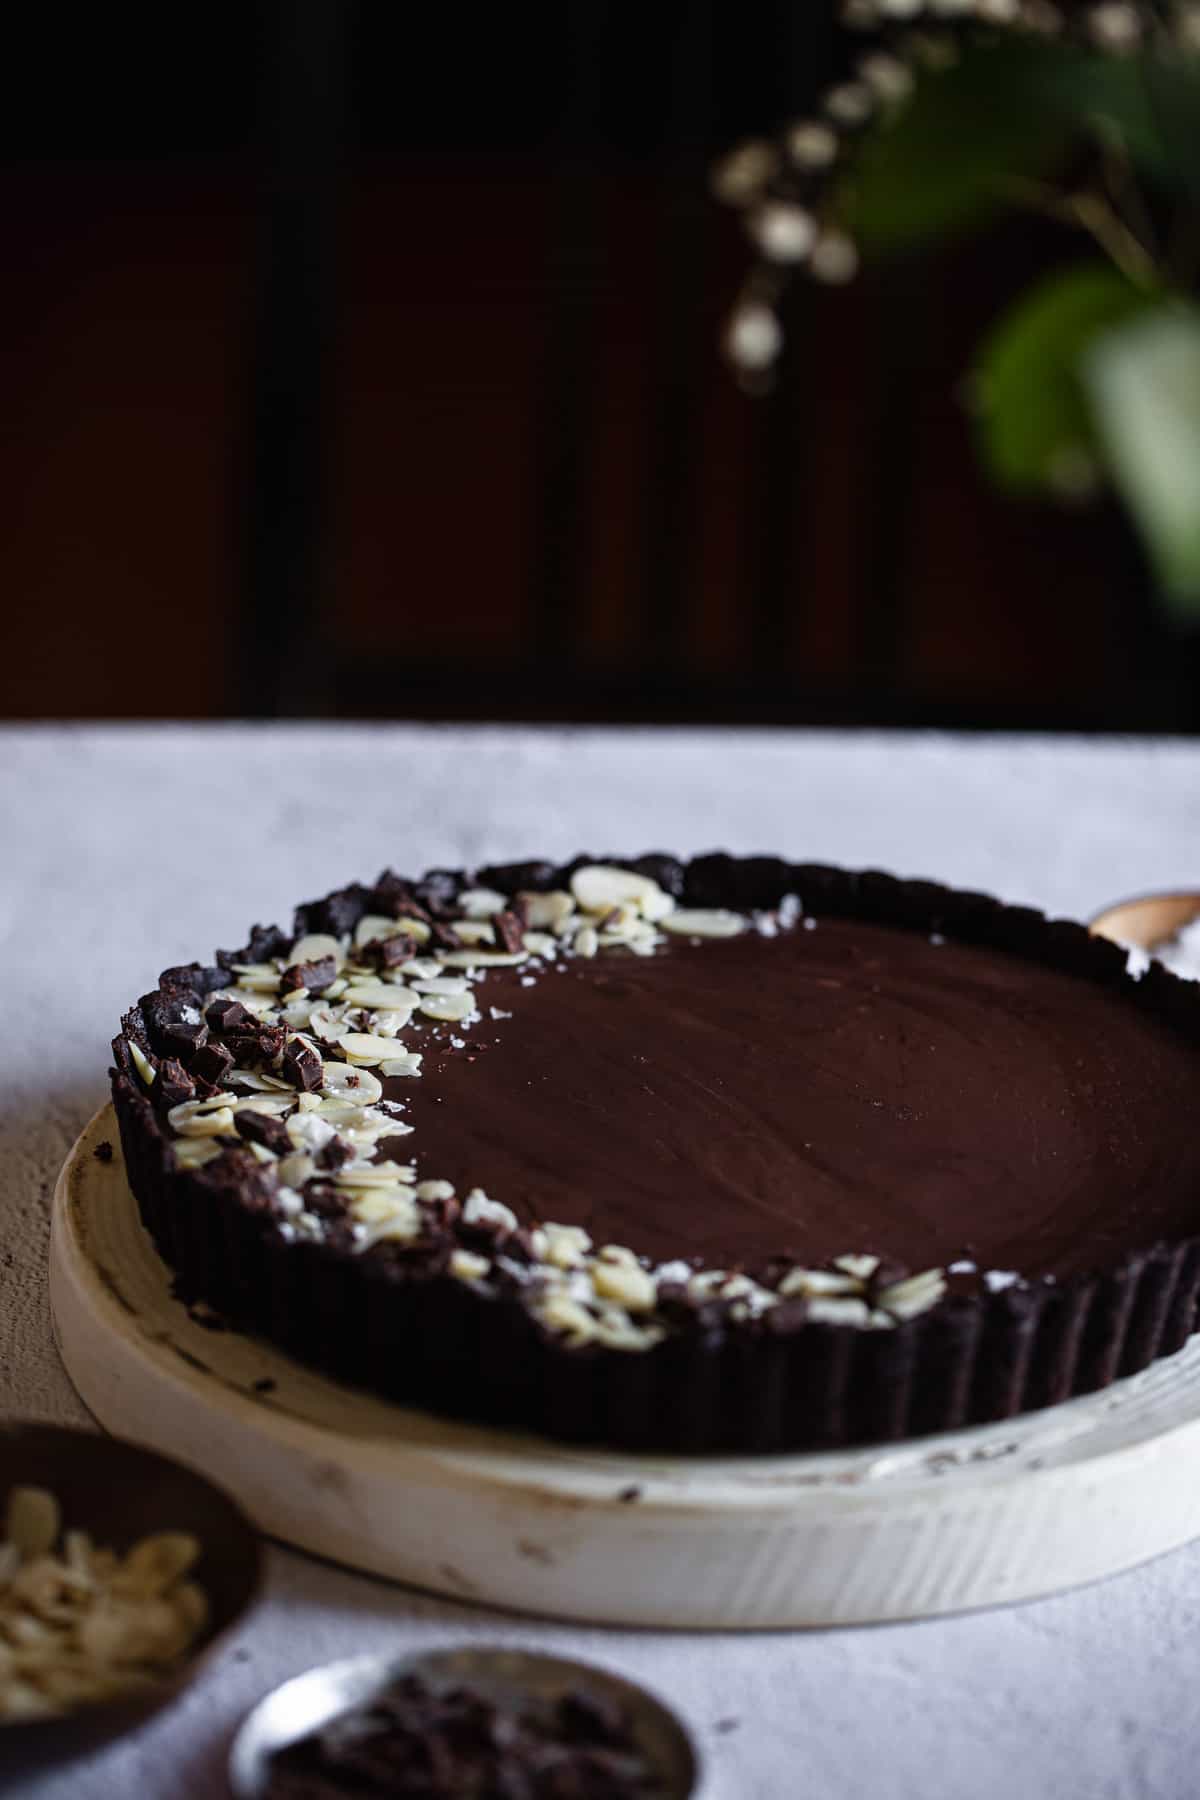 side view of chocolate tart on table